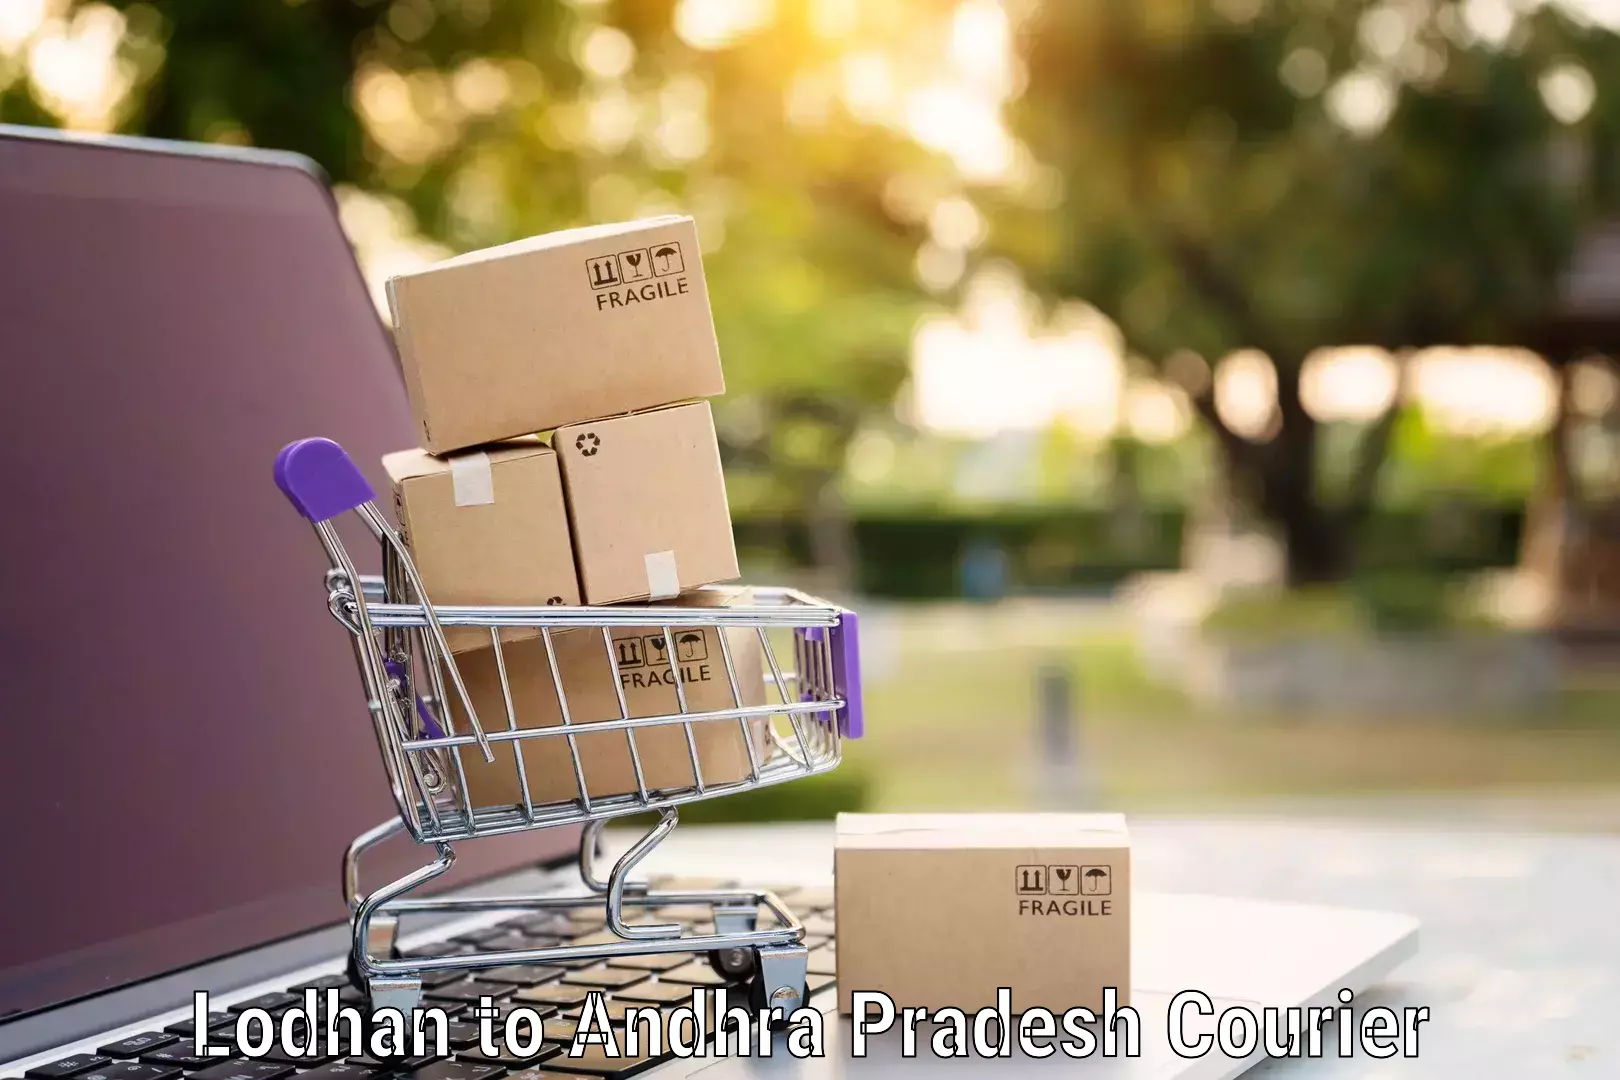 Home relocation experts Lodhan to Andhra Pradesh